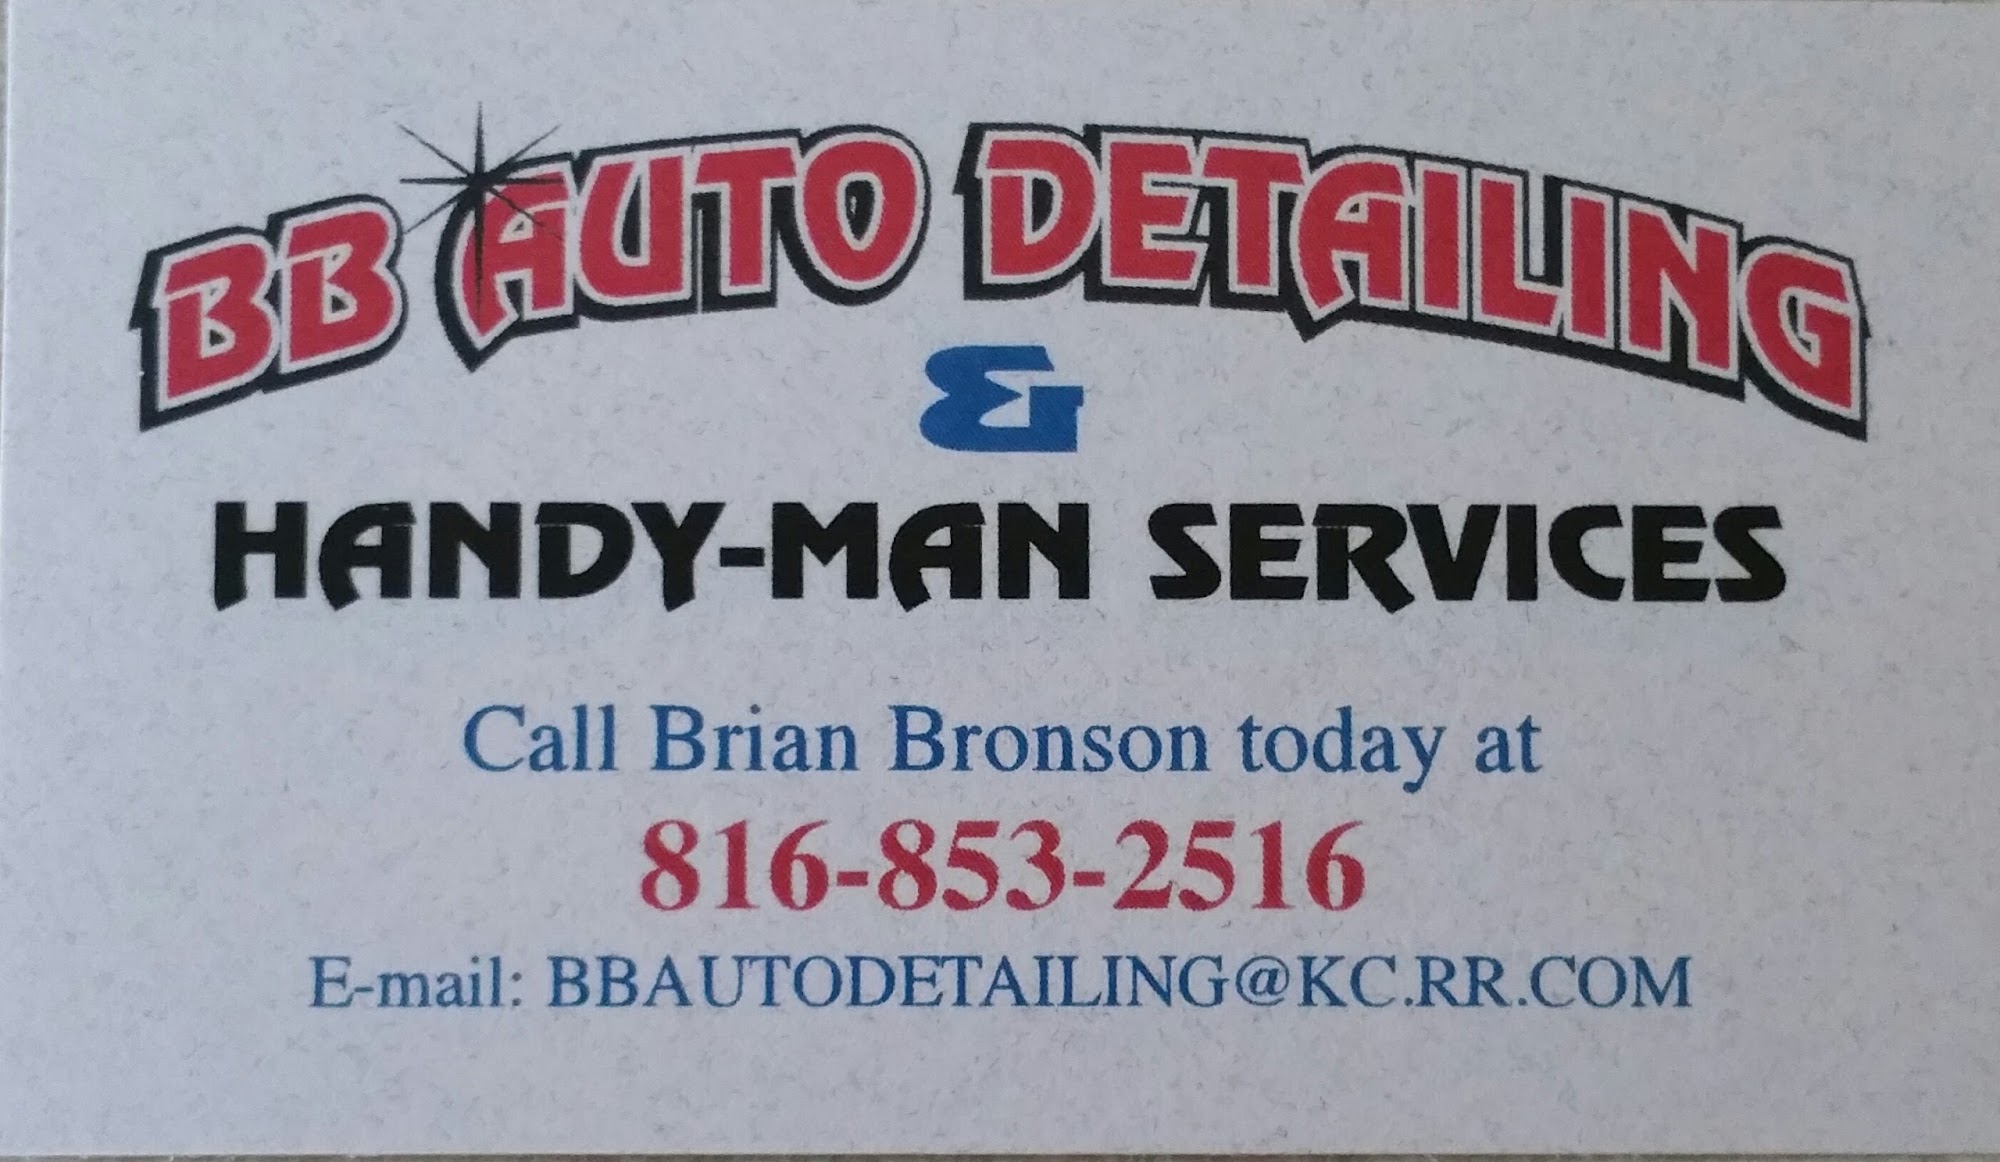 BB Auto Detailing and Handyman Services